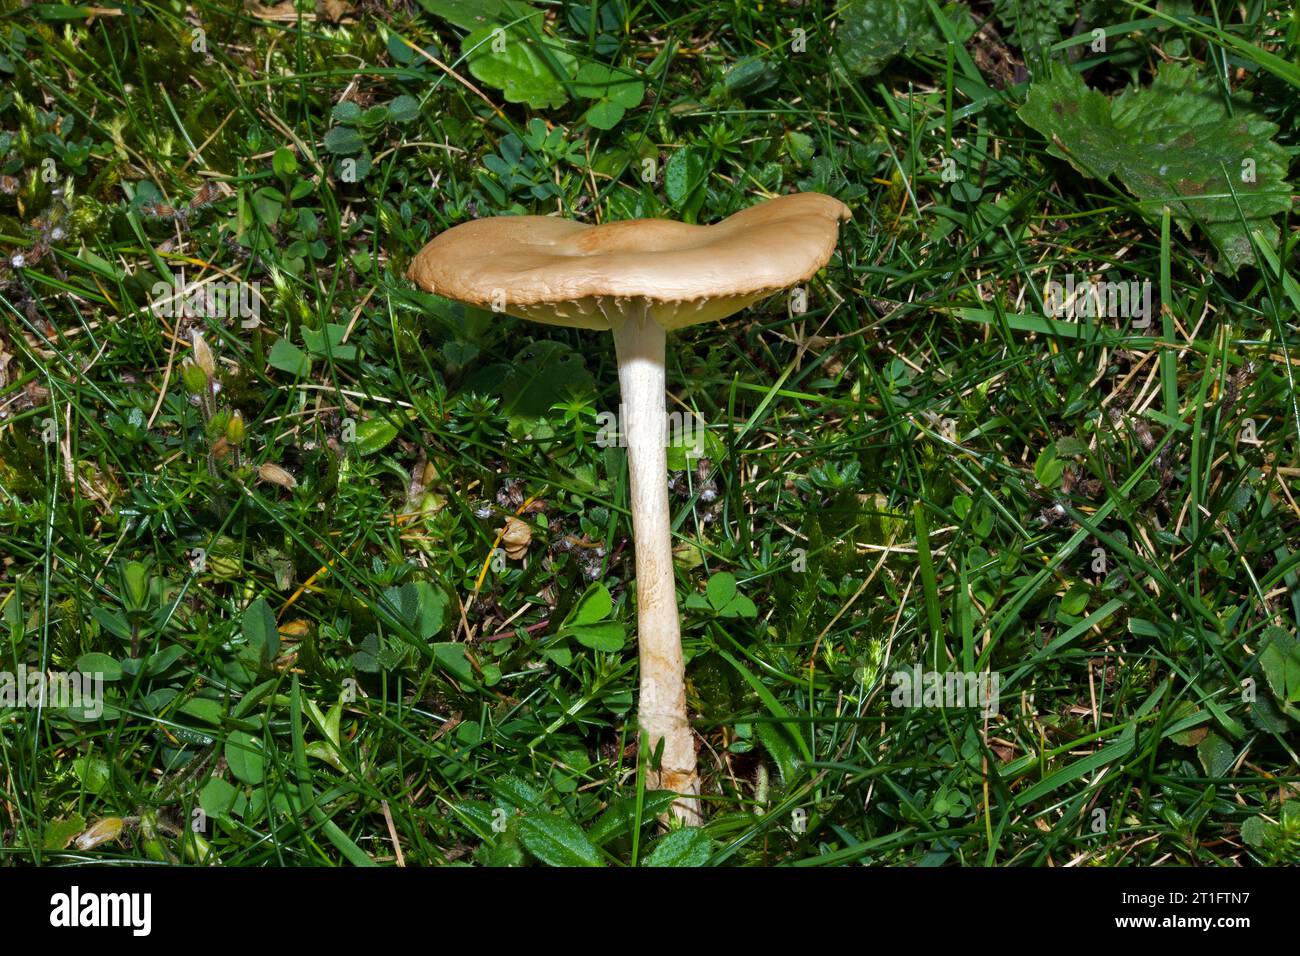 Marasmius oreades (fairy ring champignon) is a fungus found in grassy areas such as meadows and coastal dunes. It occurs in Europe and North America. Stock Photo